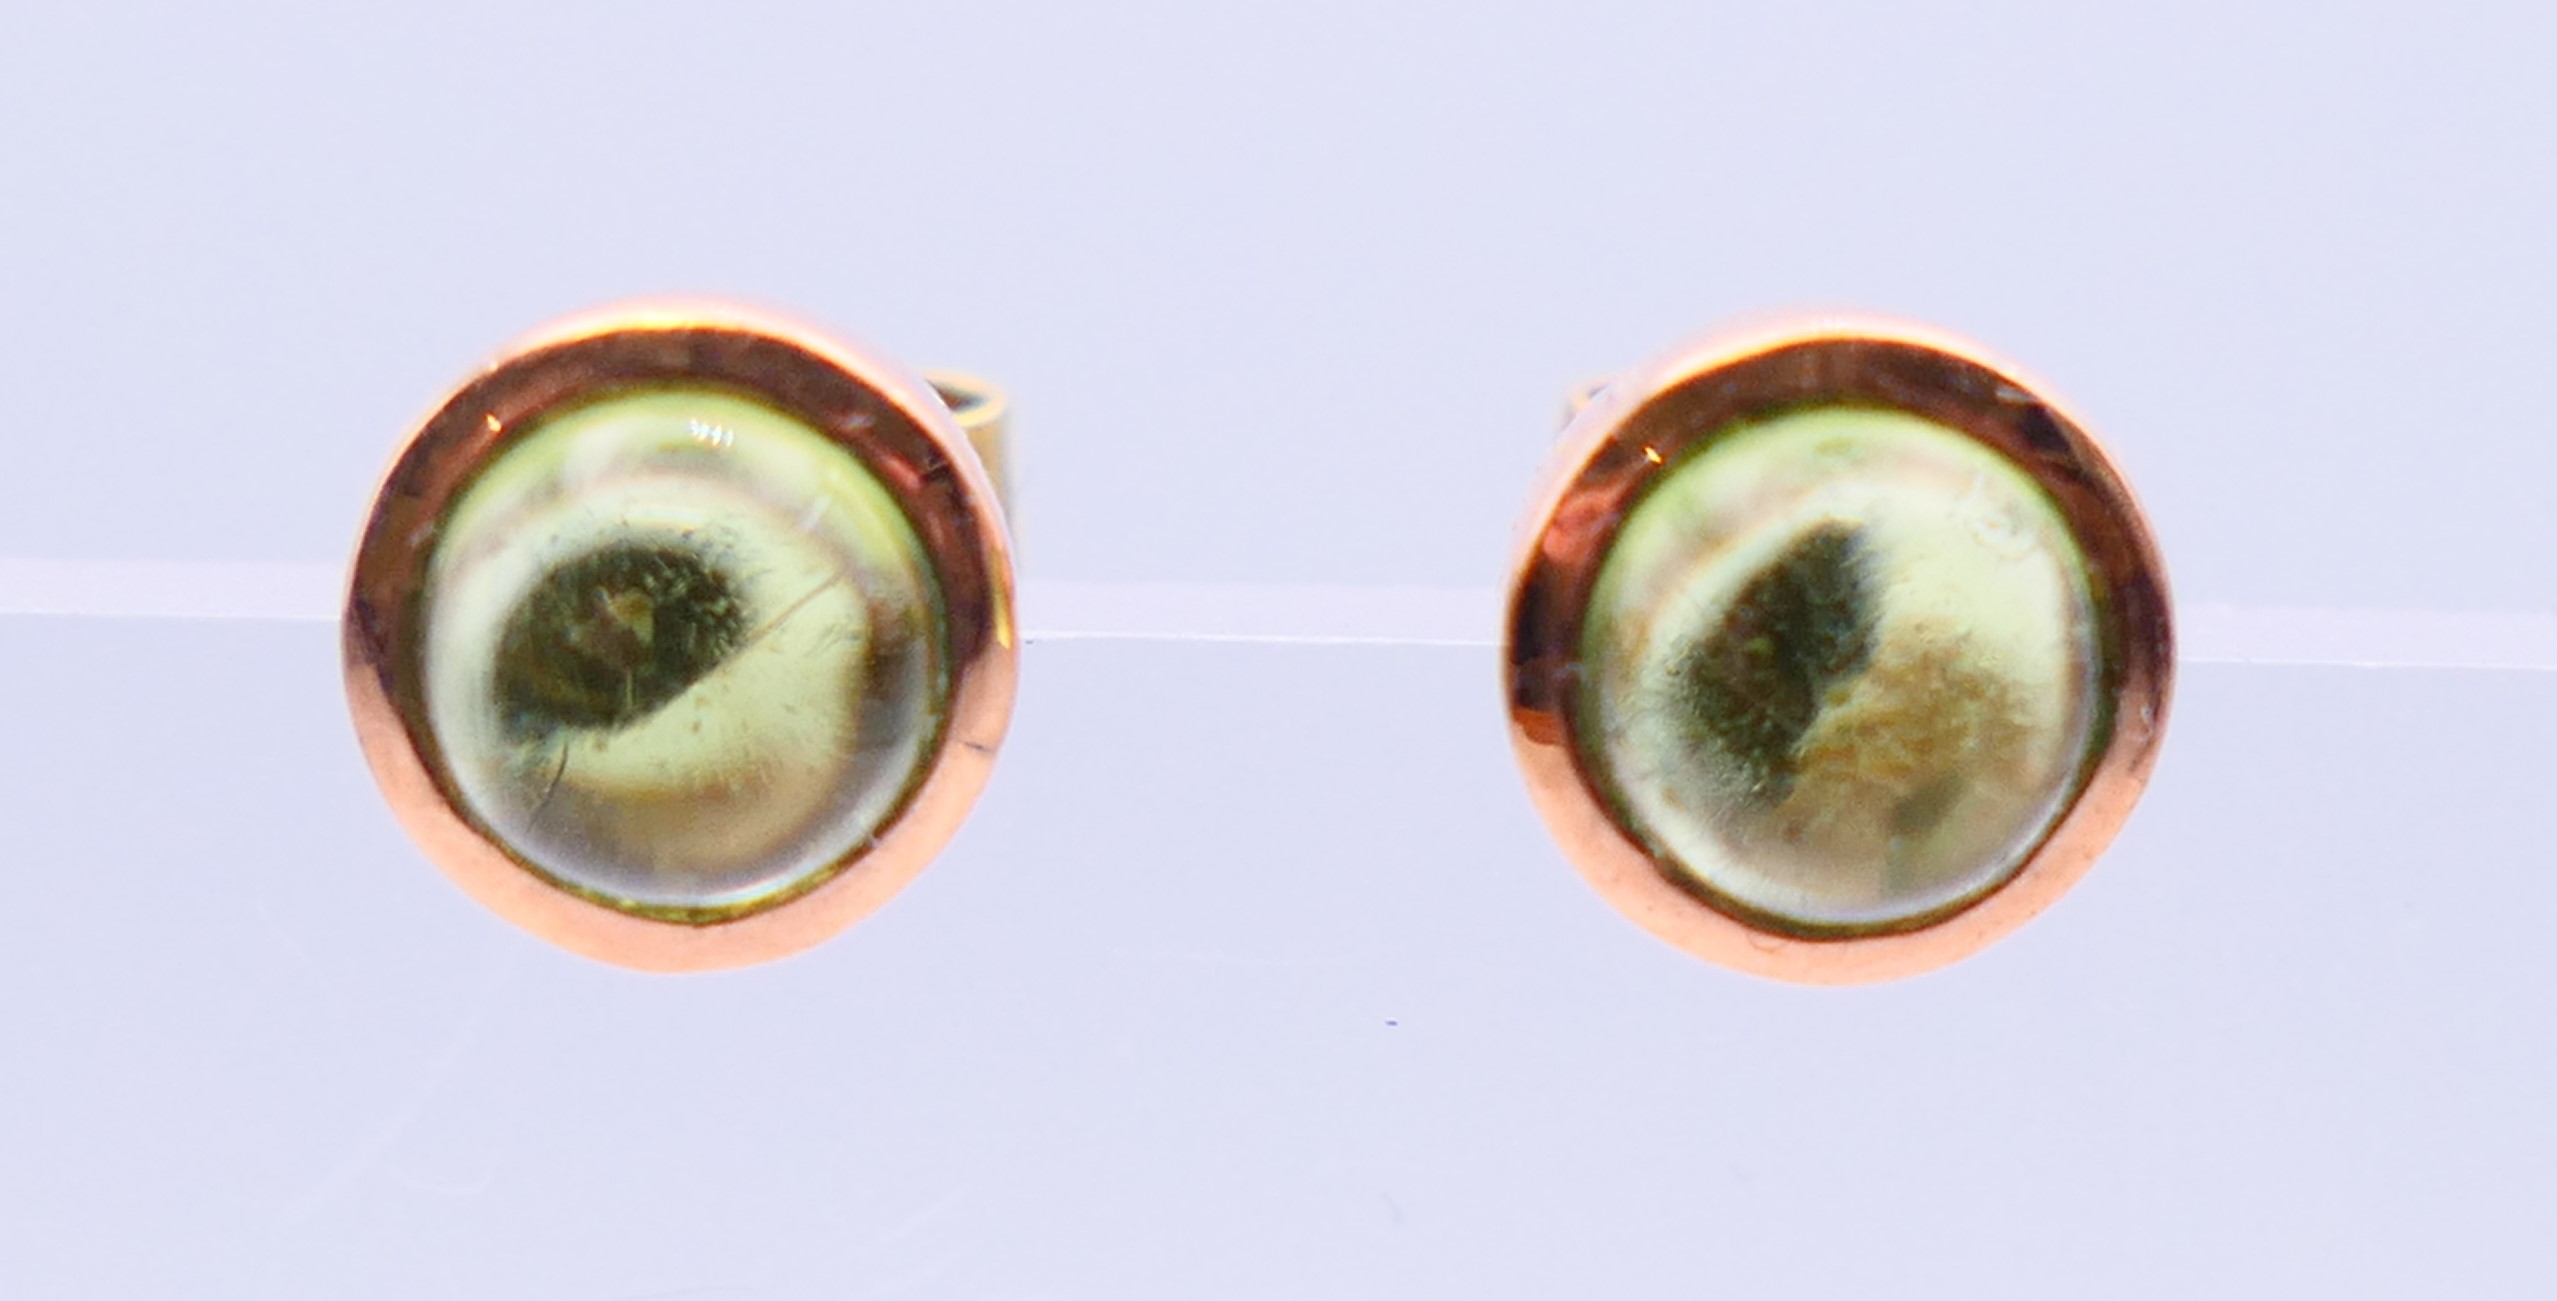 A pair of 9 ct rose gold earrings, each set with star cut/cabochon peridot gemstone. 0.